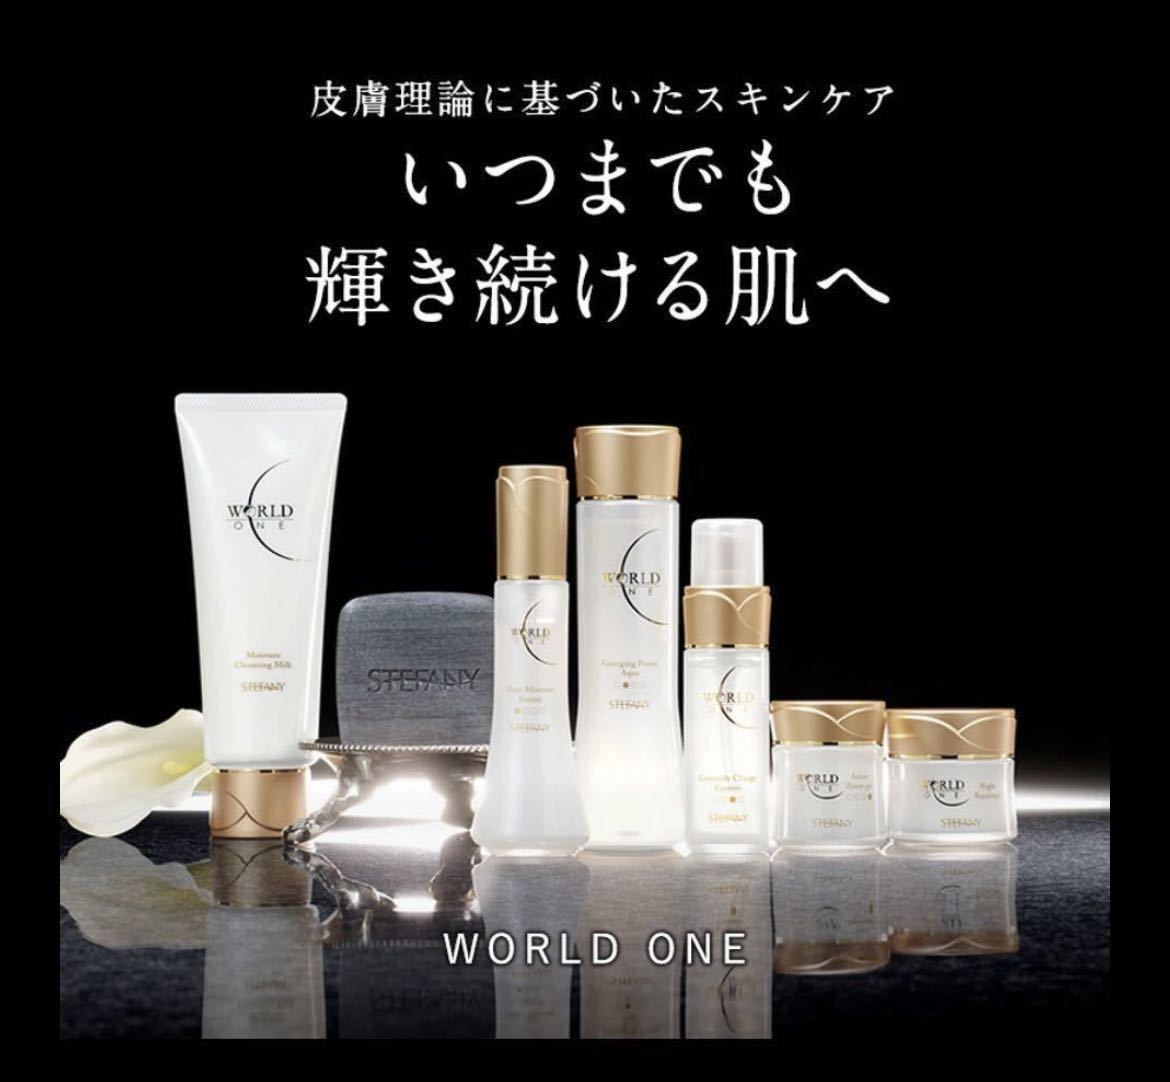  super-discount world one active power gel beauty gel beauty care liquid 5g×6 30g Ginza stereo fa knee cosmetics Trial .. goods trial sample 